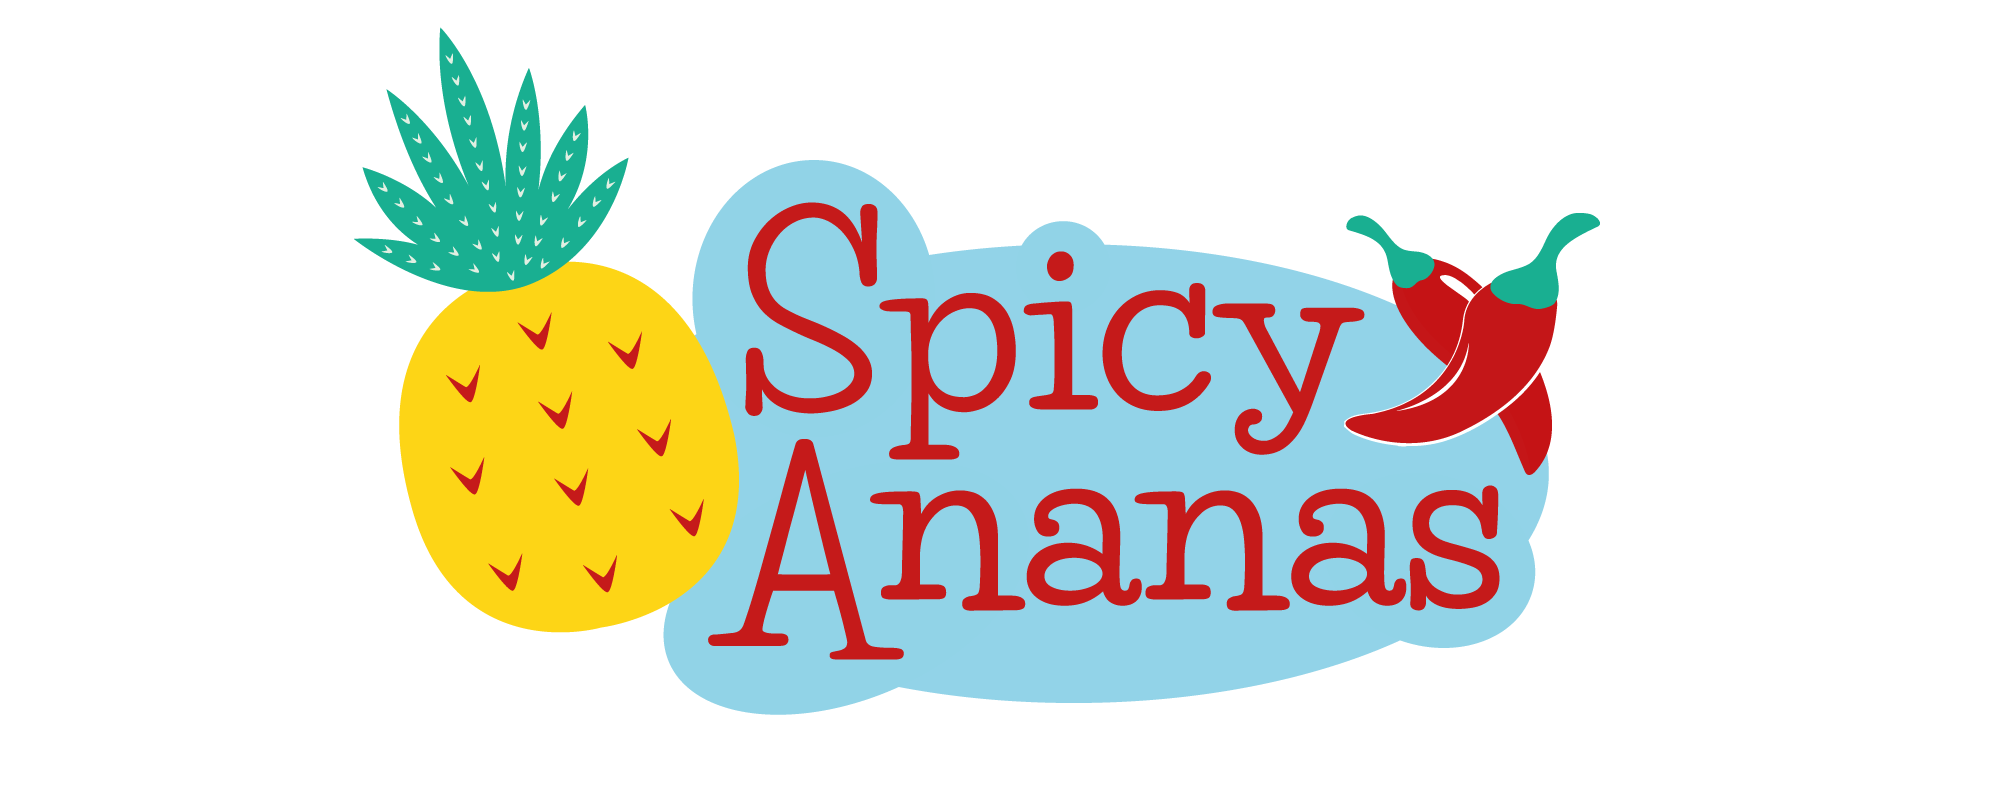 Spicy Ananas